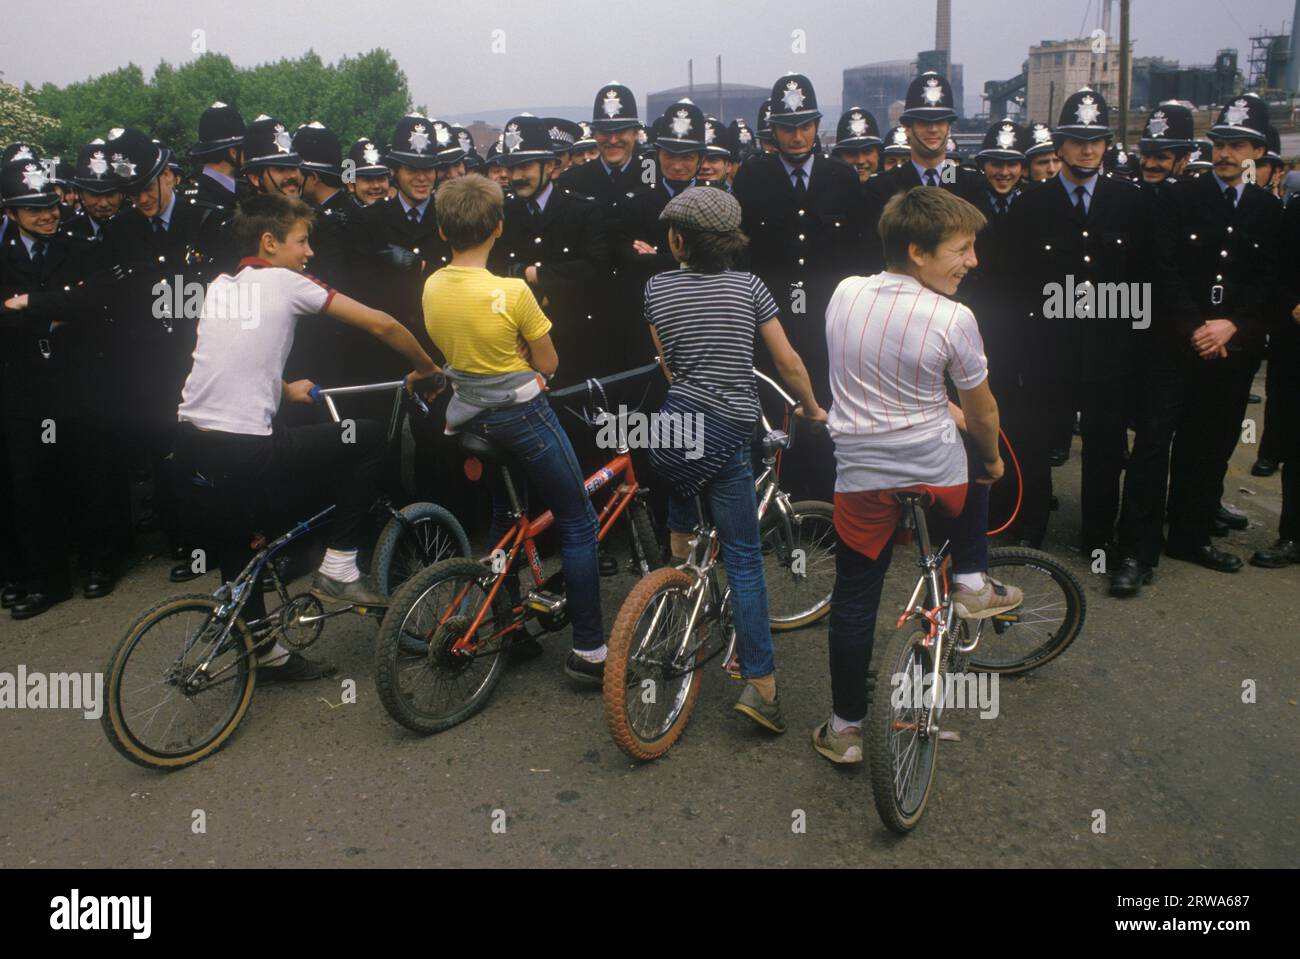 Miners Strike. Orgreave Near Rotherham Yorkshire 1984. Children on their chopper bikes and the police line. 1980s UK HOMER SYKES Stock Photo